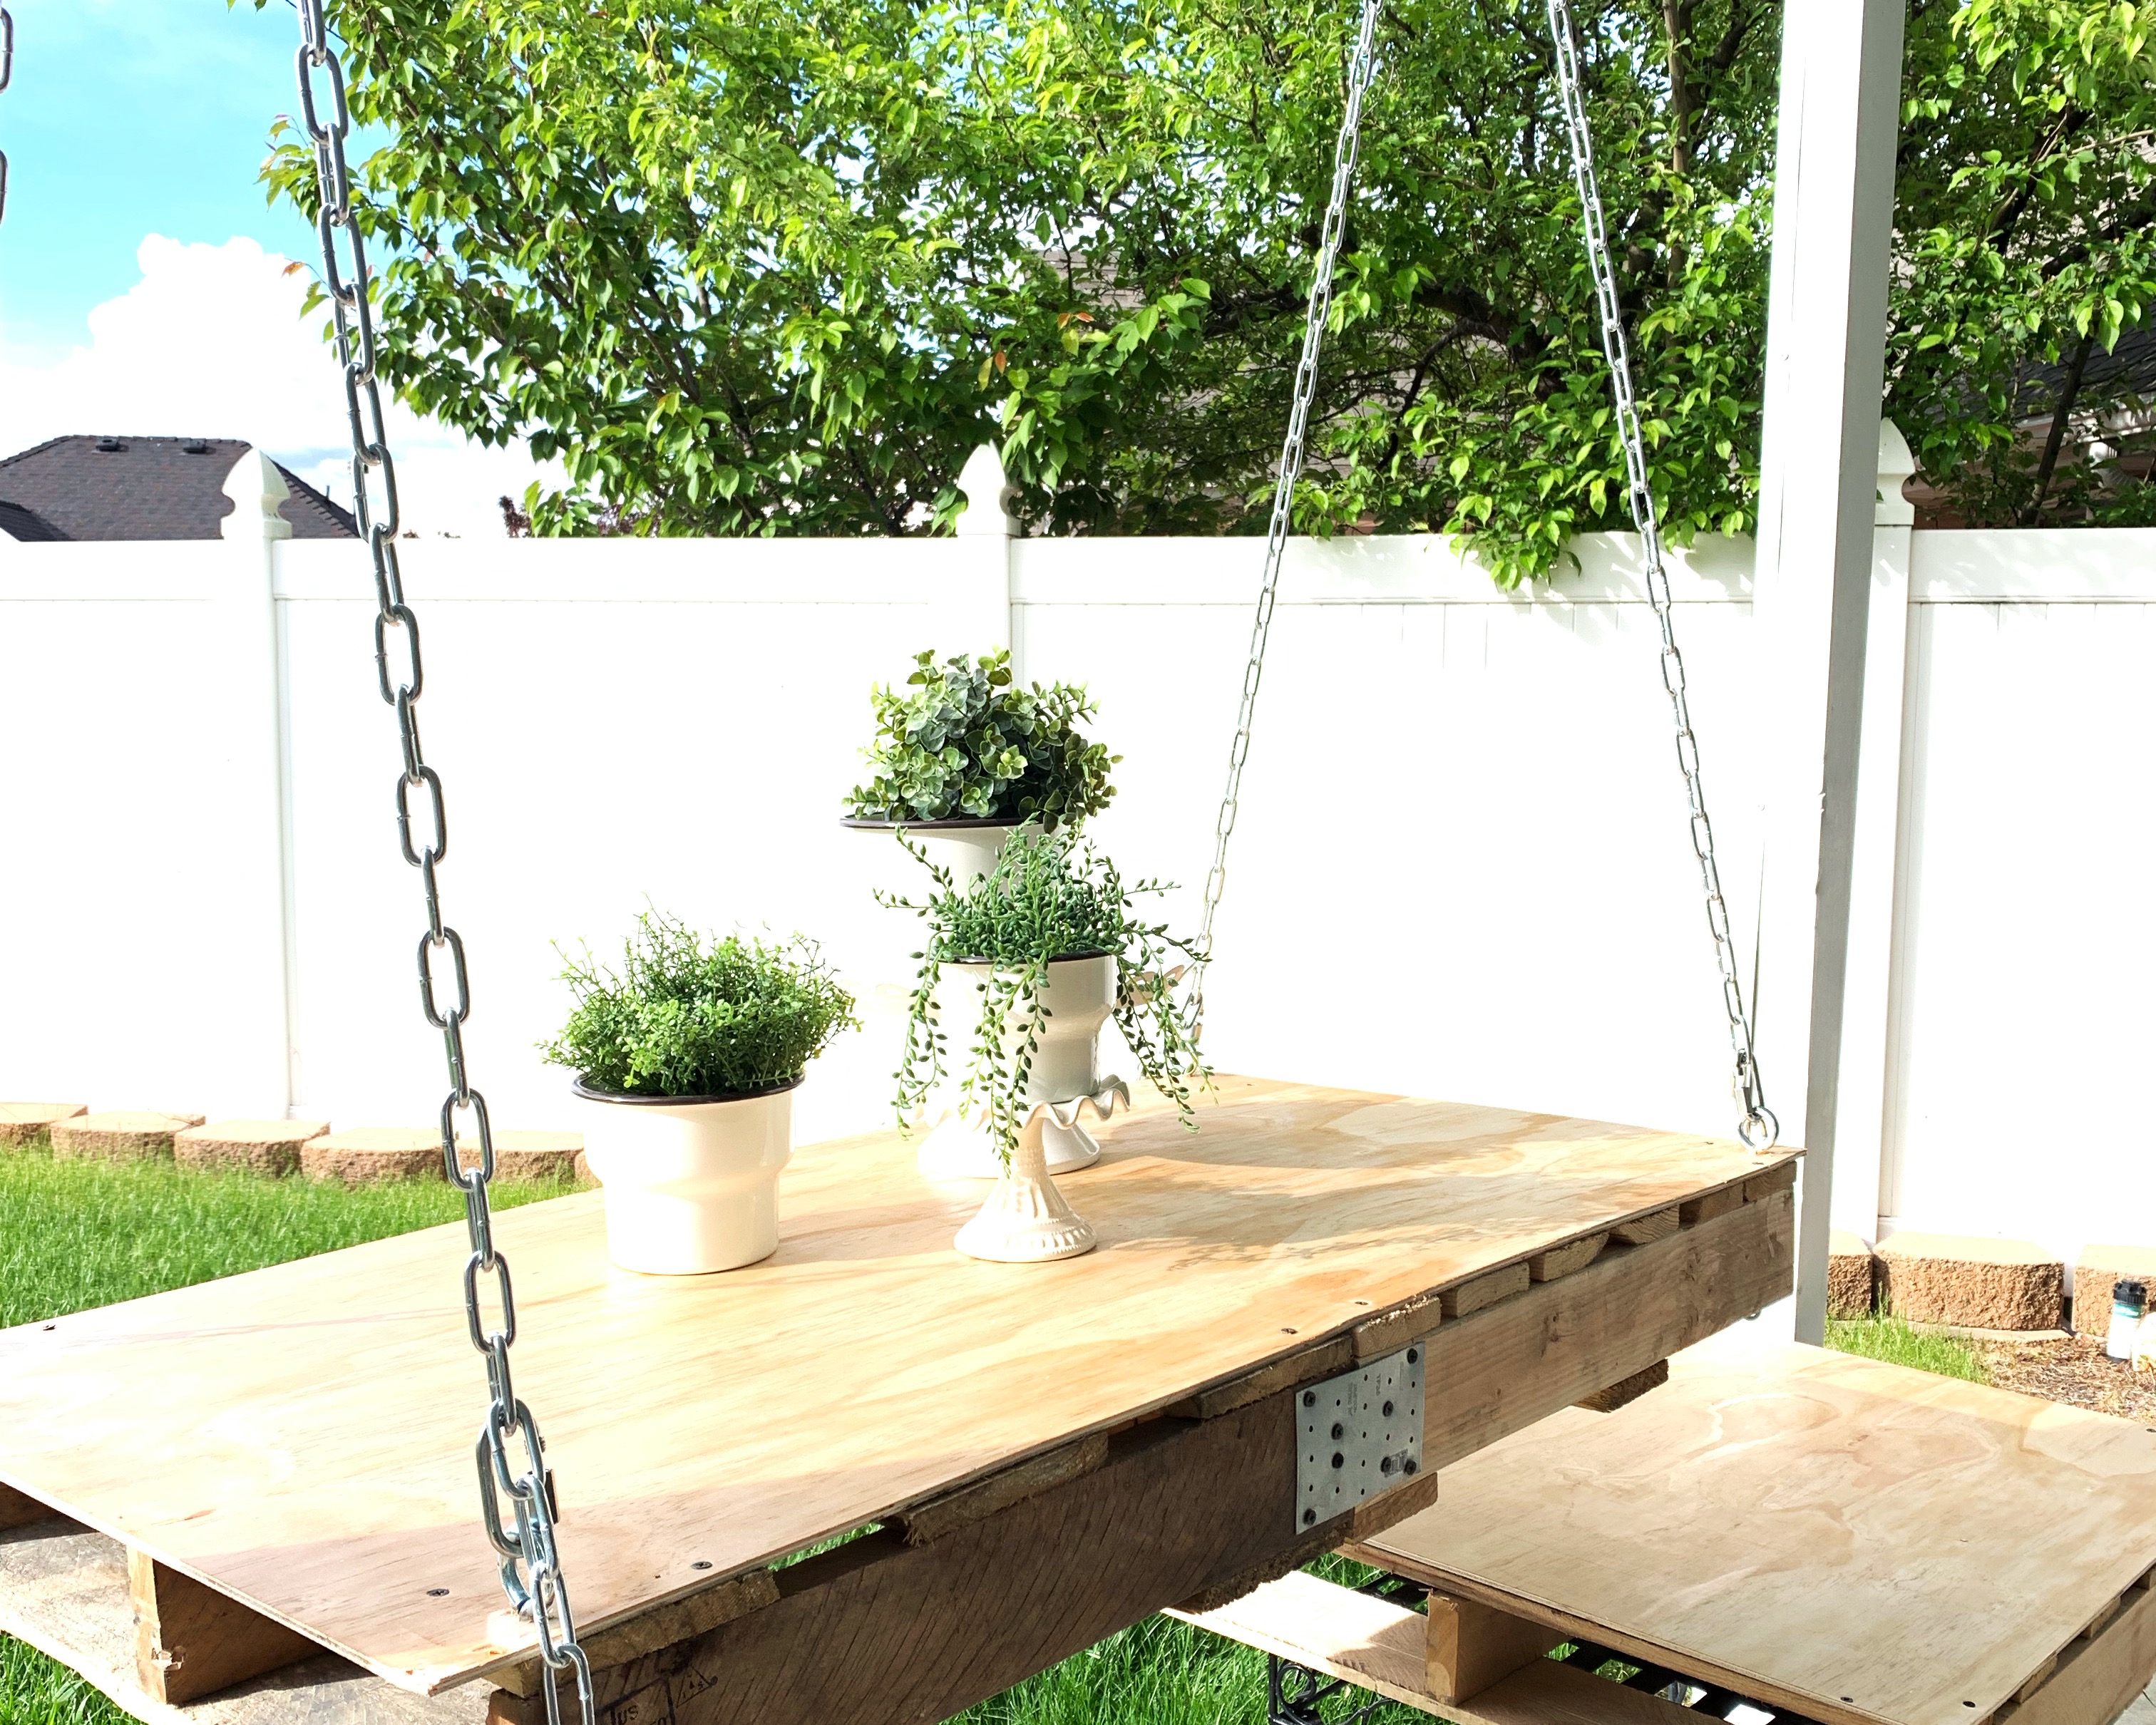 diy floating table, hanging table, how to make a hanging table, how to make a floating table, wedding decor, Party decor, outdoor entertaining, backyard food table, how to make a table out of pallets, pallet floating table, studio 5 crafts, diy table, outdoor table,